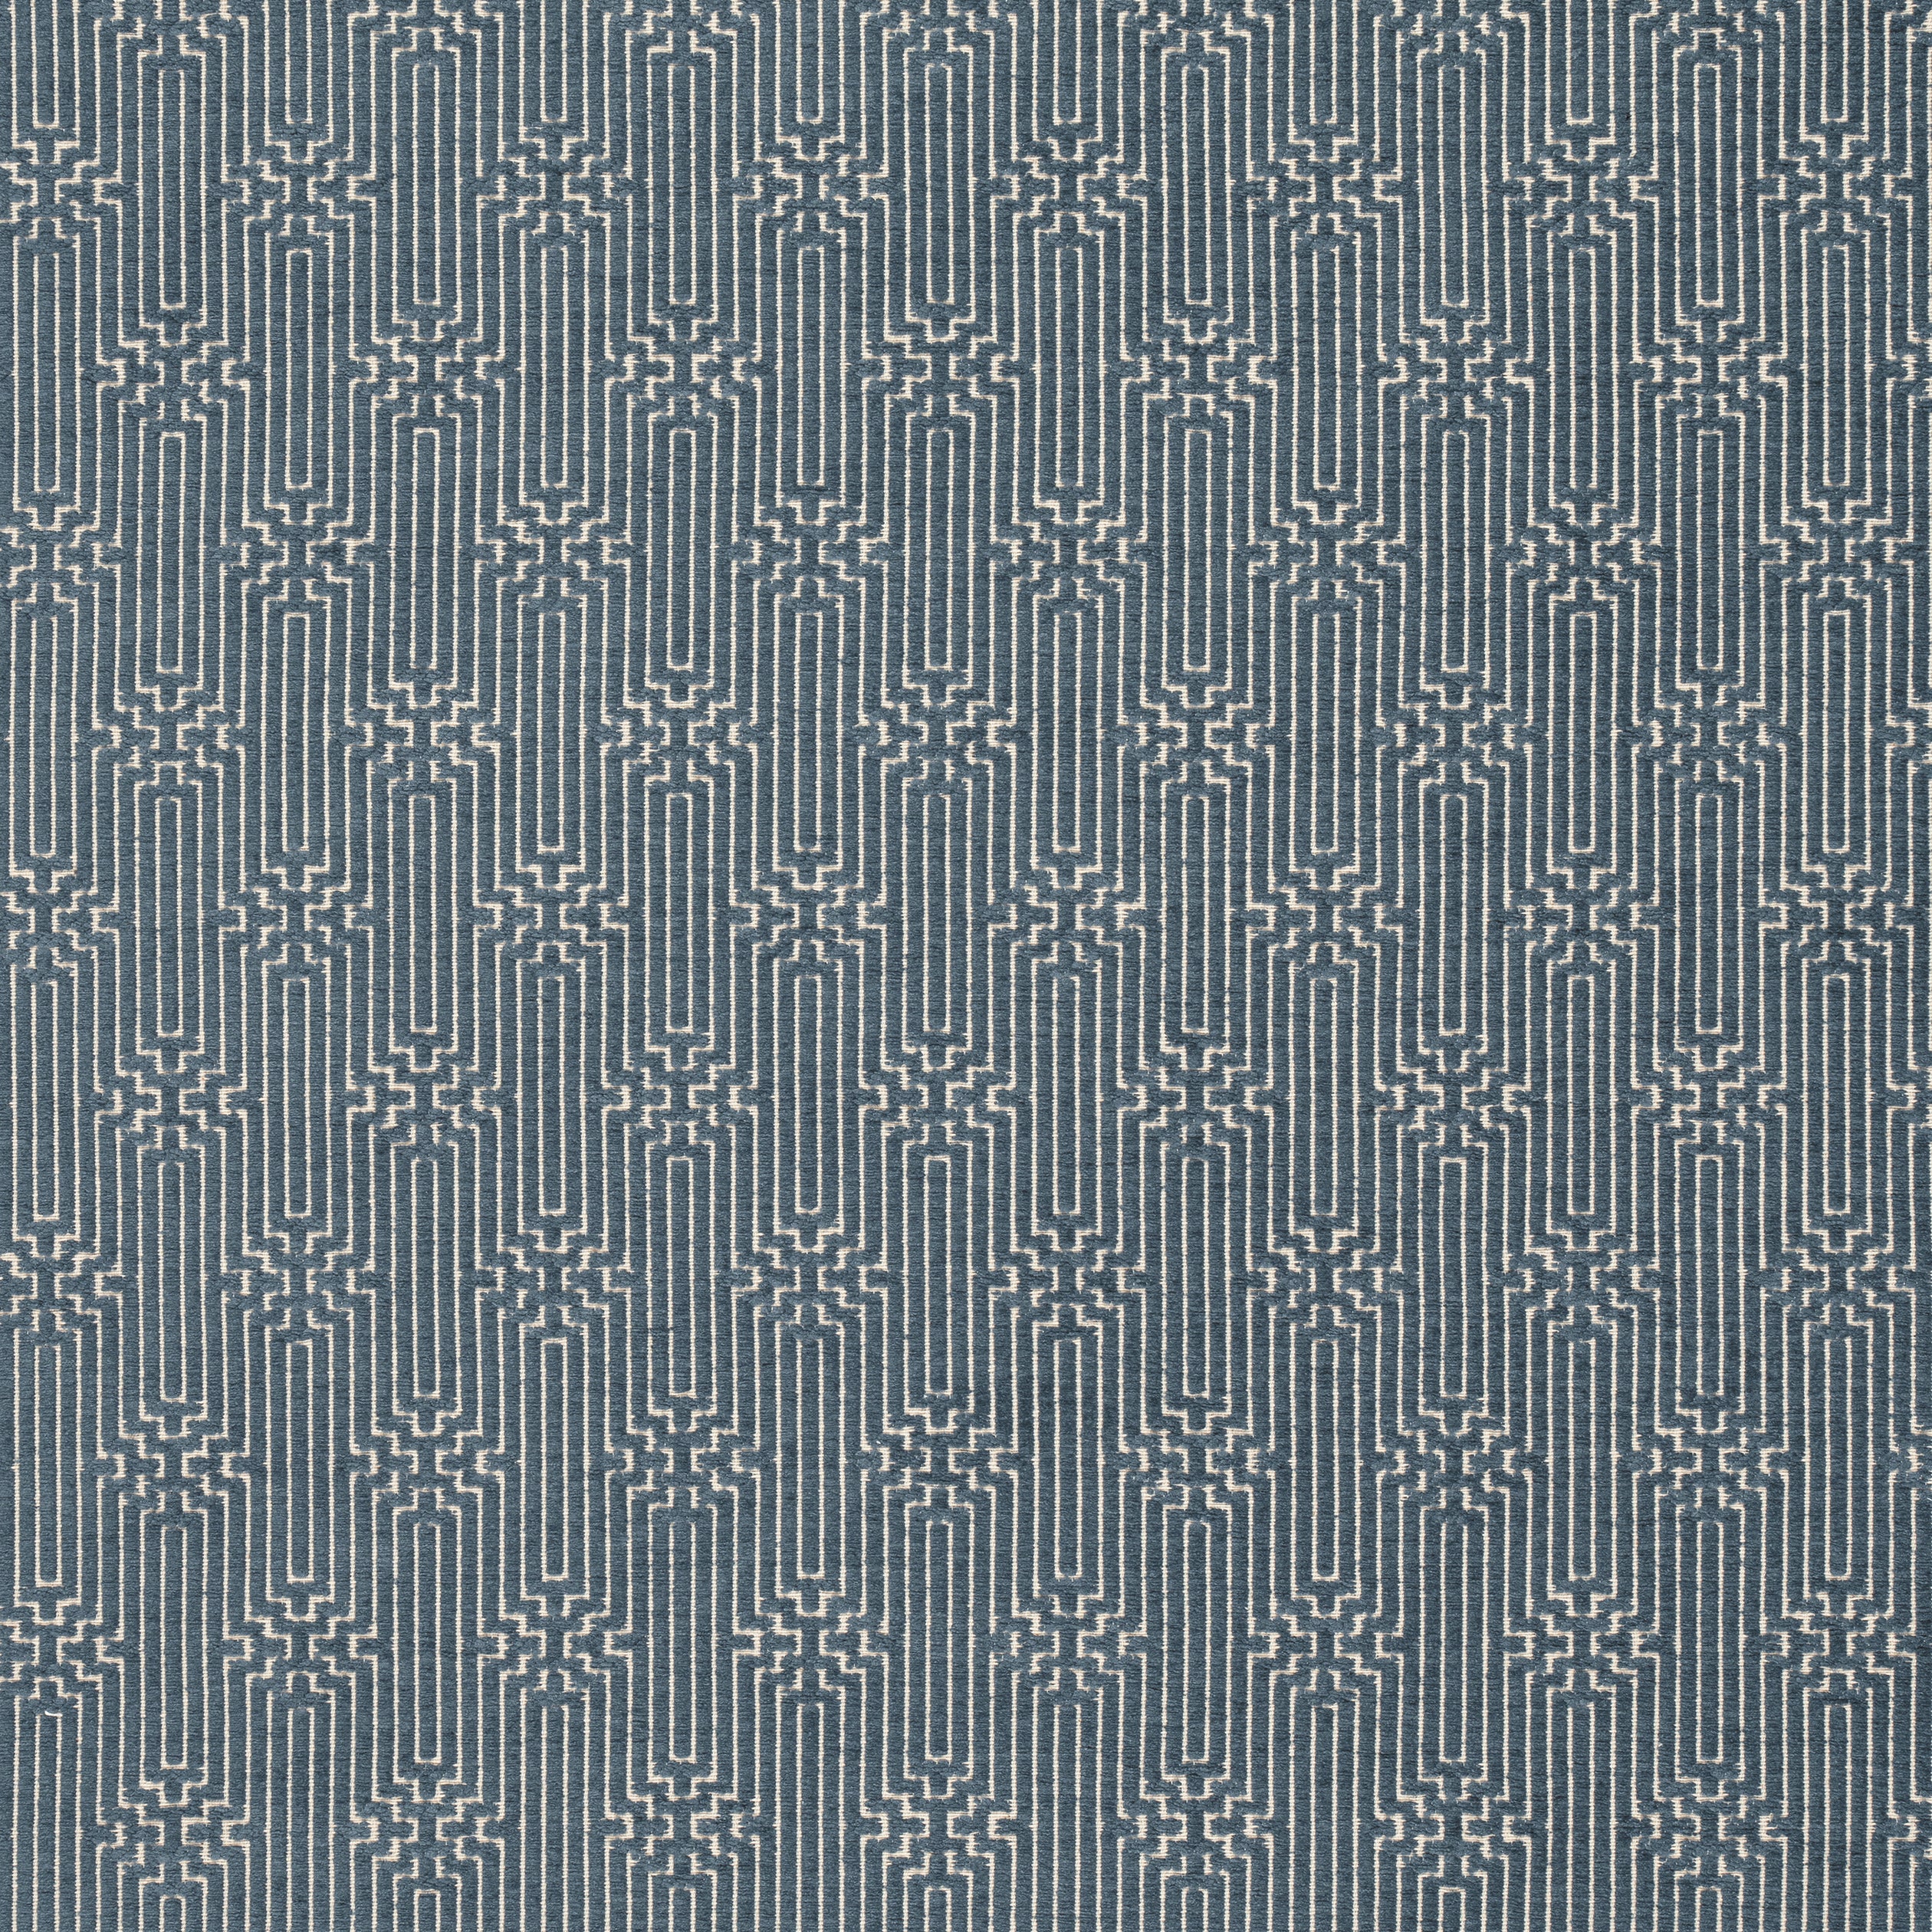 Crete fabric in heron color - pattern number W74213 - by Thibaut in the Passage collection